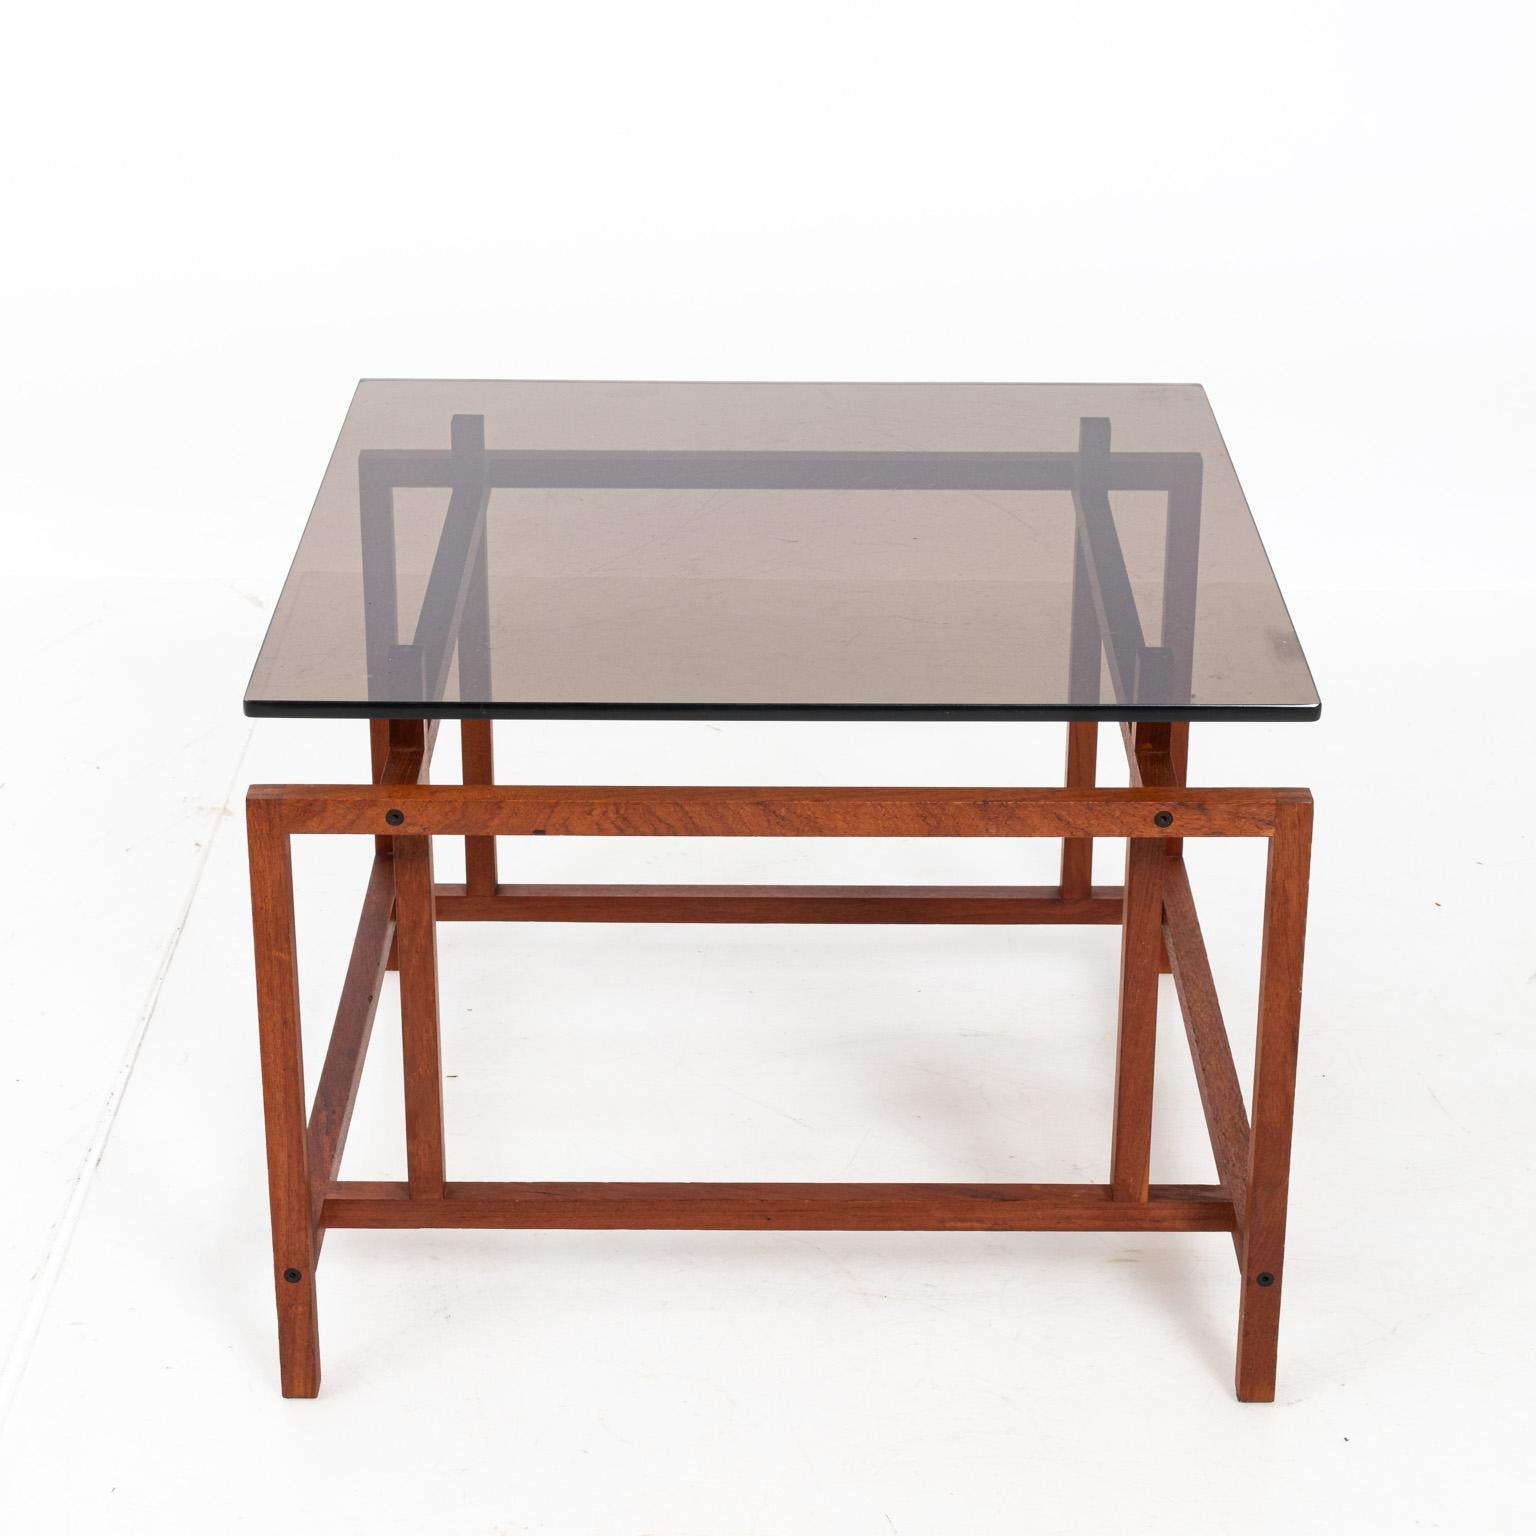 Pair of Henning Norgaard Rosewood end tables by Komort Mobler. Denmark. smoked Lucite top, please note of wear consistent with age.